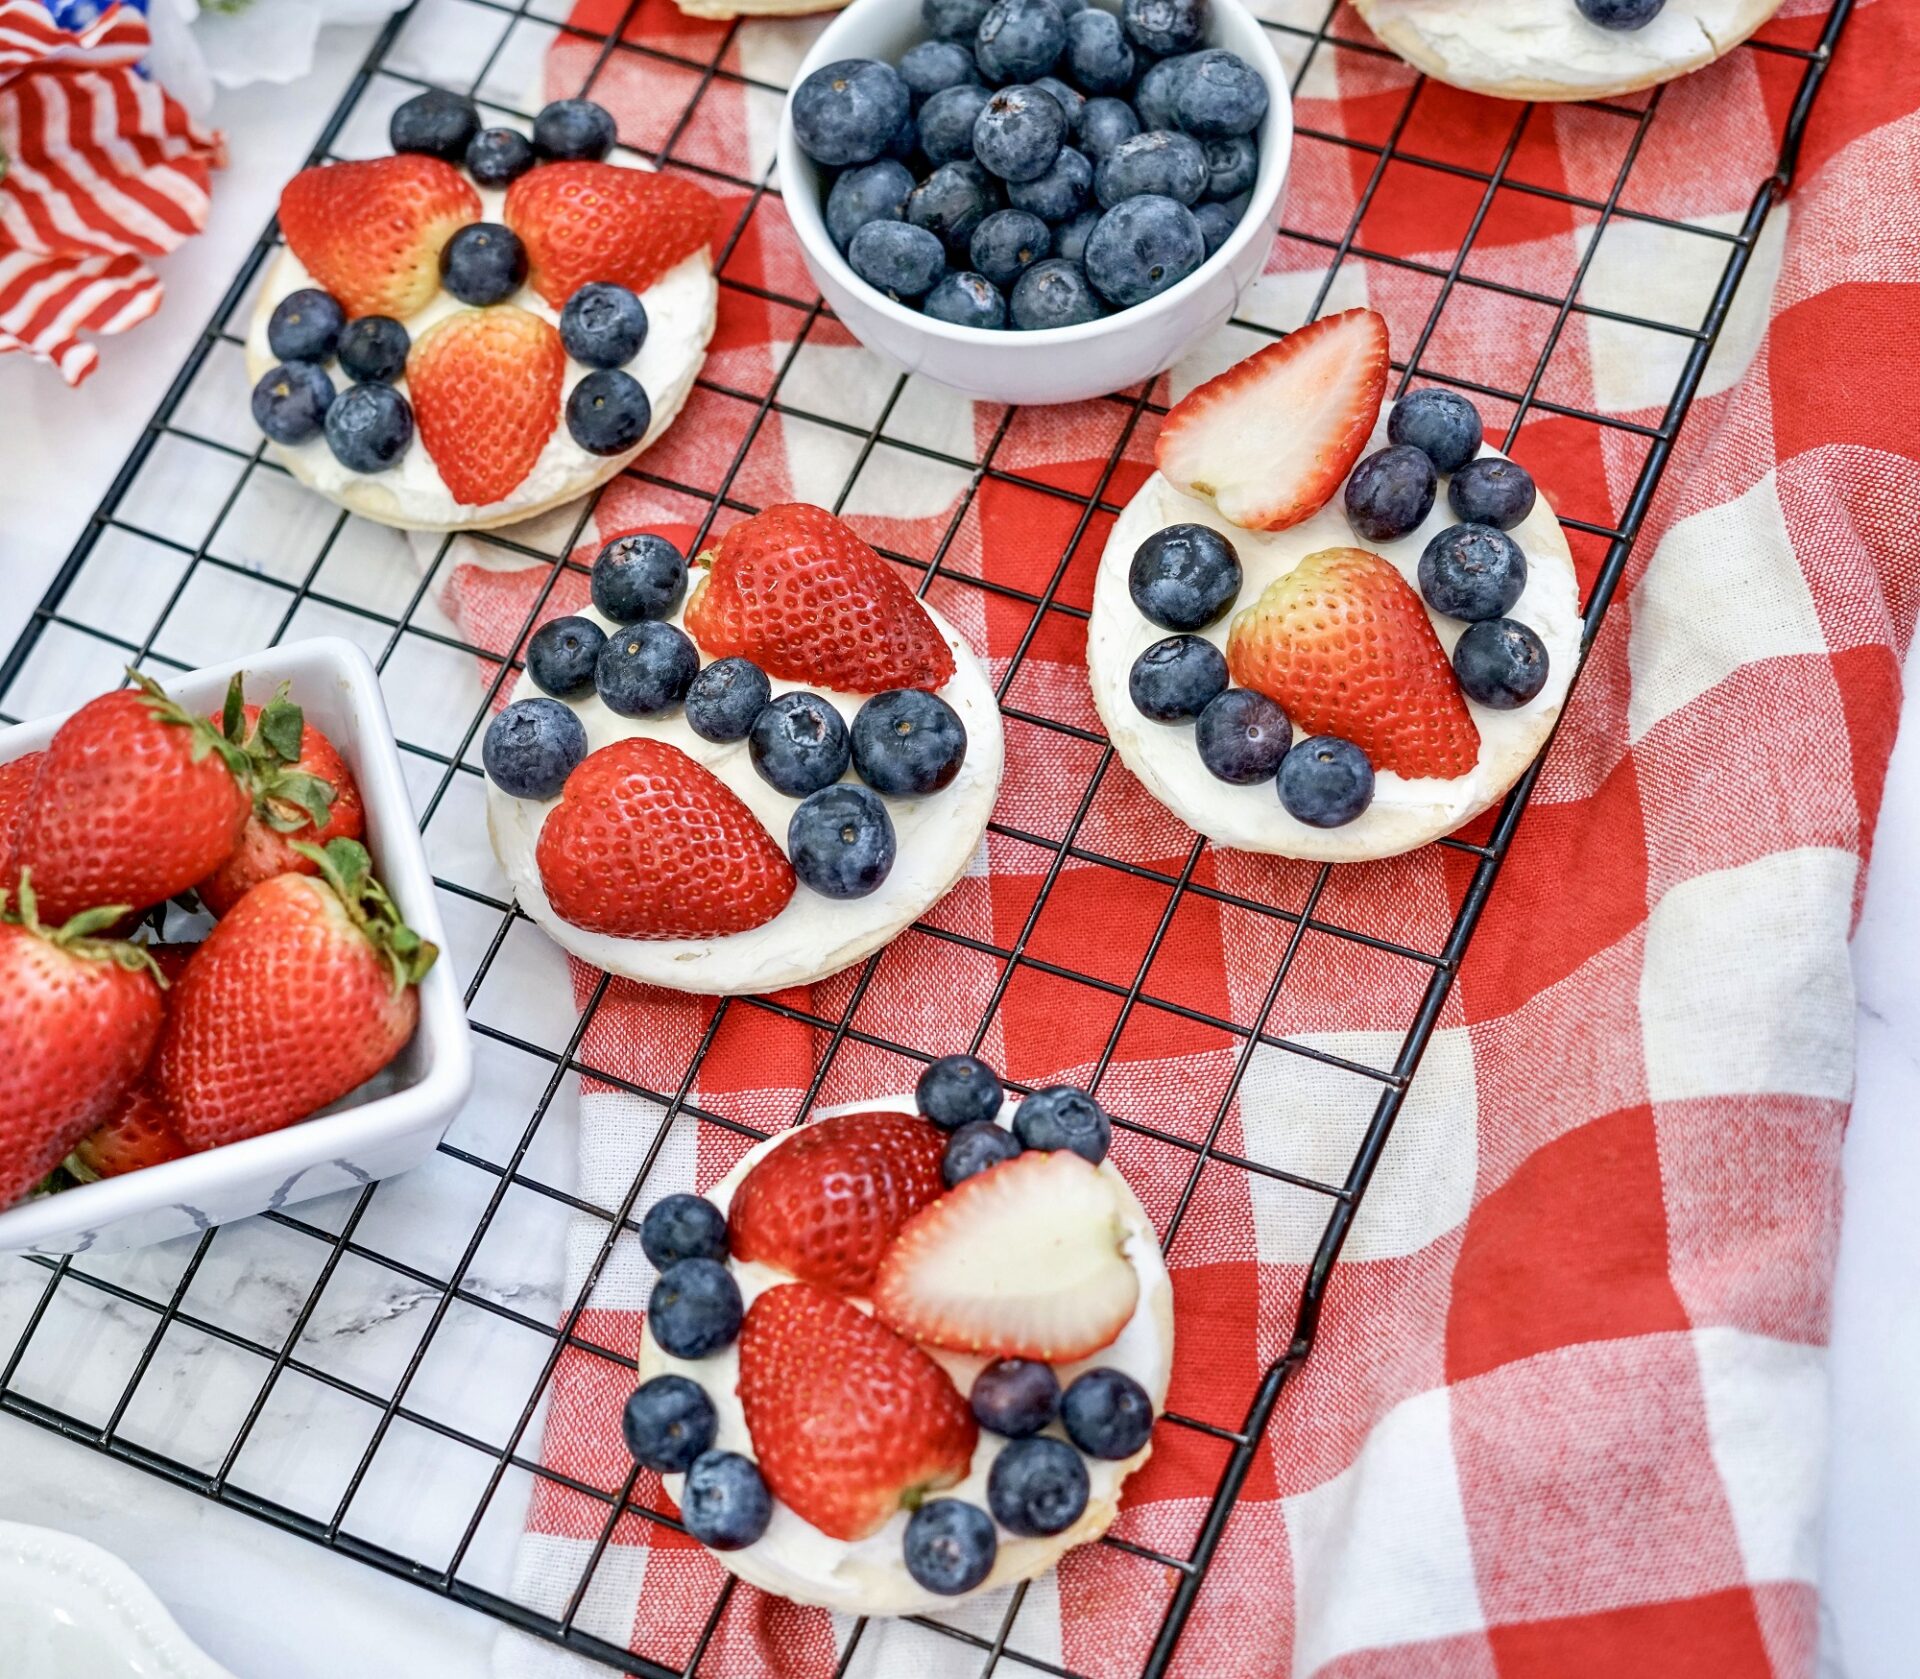 mini fruit pizzas on a wire rack above a checkered red tablecloth.